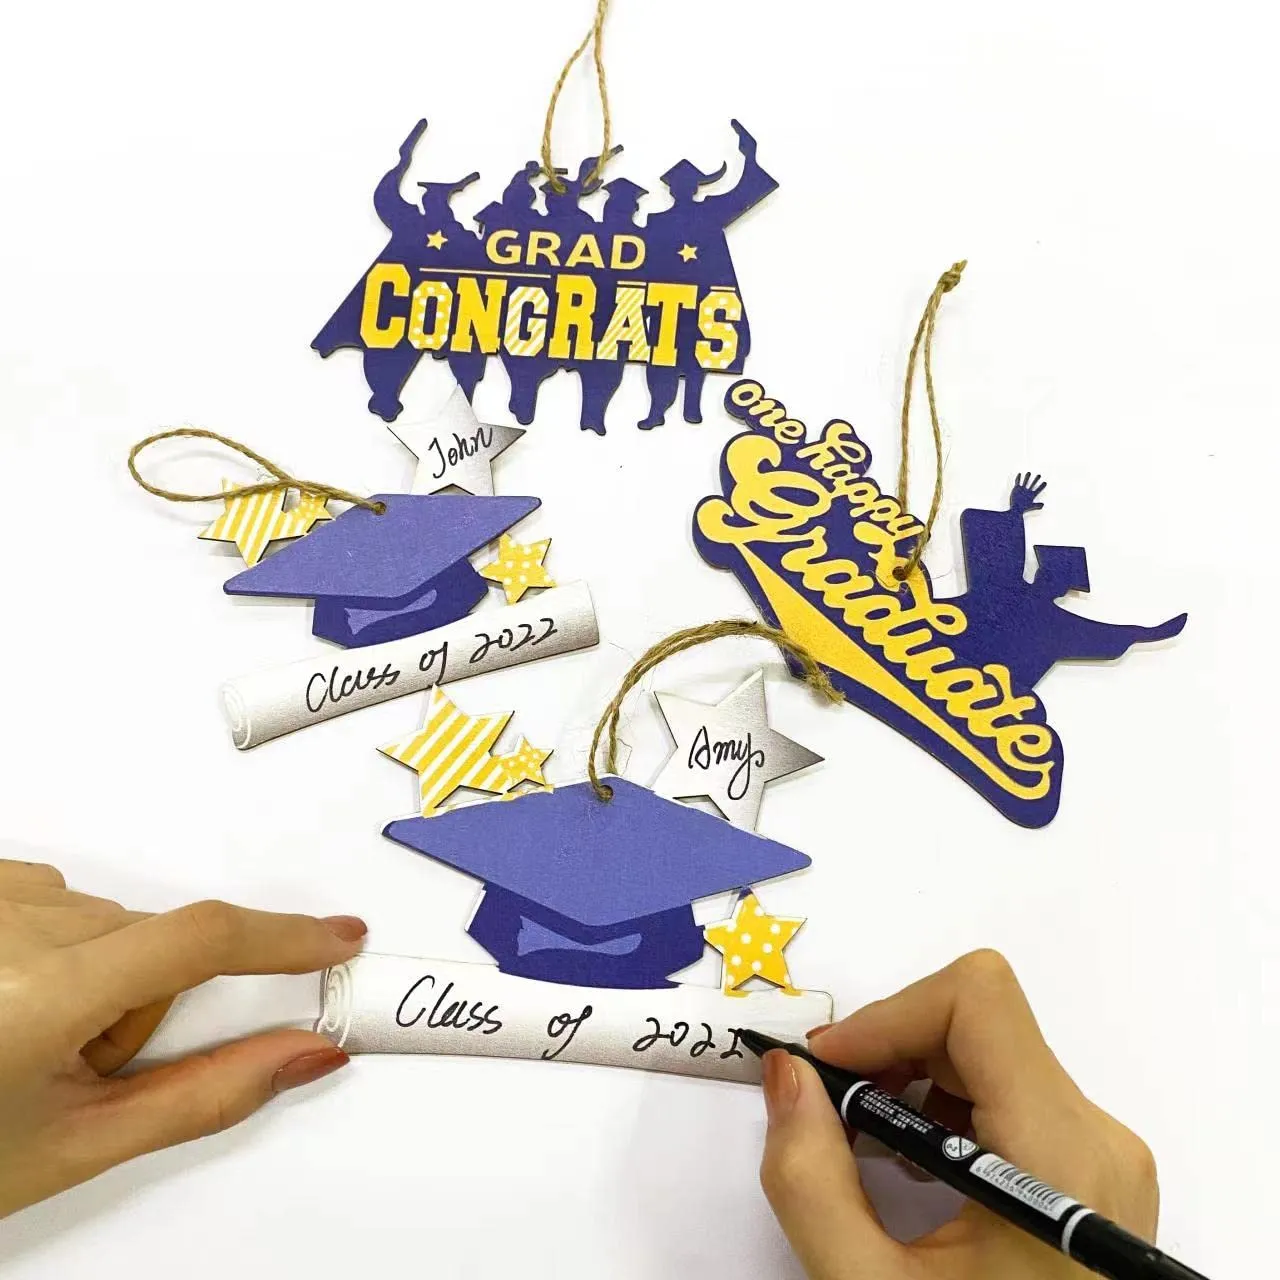 navy blue and gold graduations decorations ornaments grad congrats one happy graduate you did it and im proud of you sign wooden graduations tree ornaments for graduations party supplies